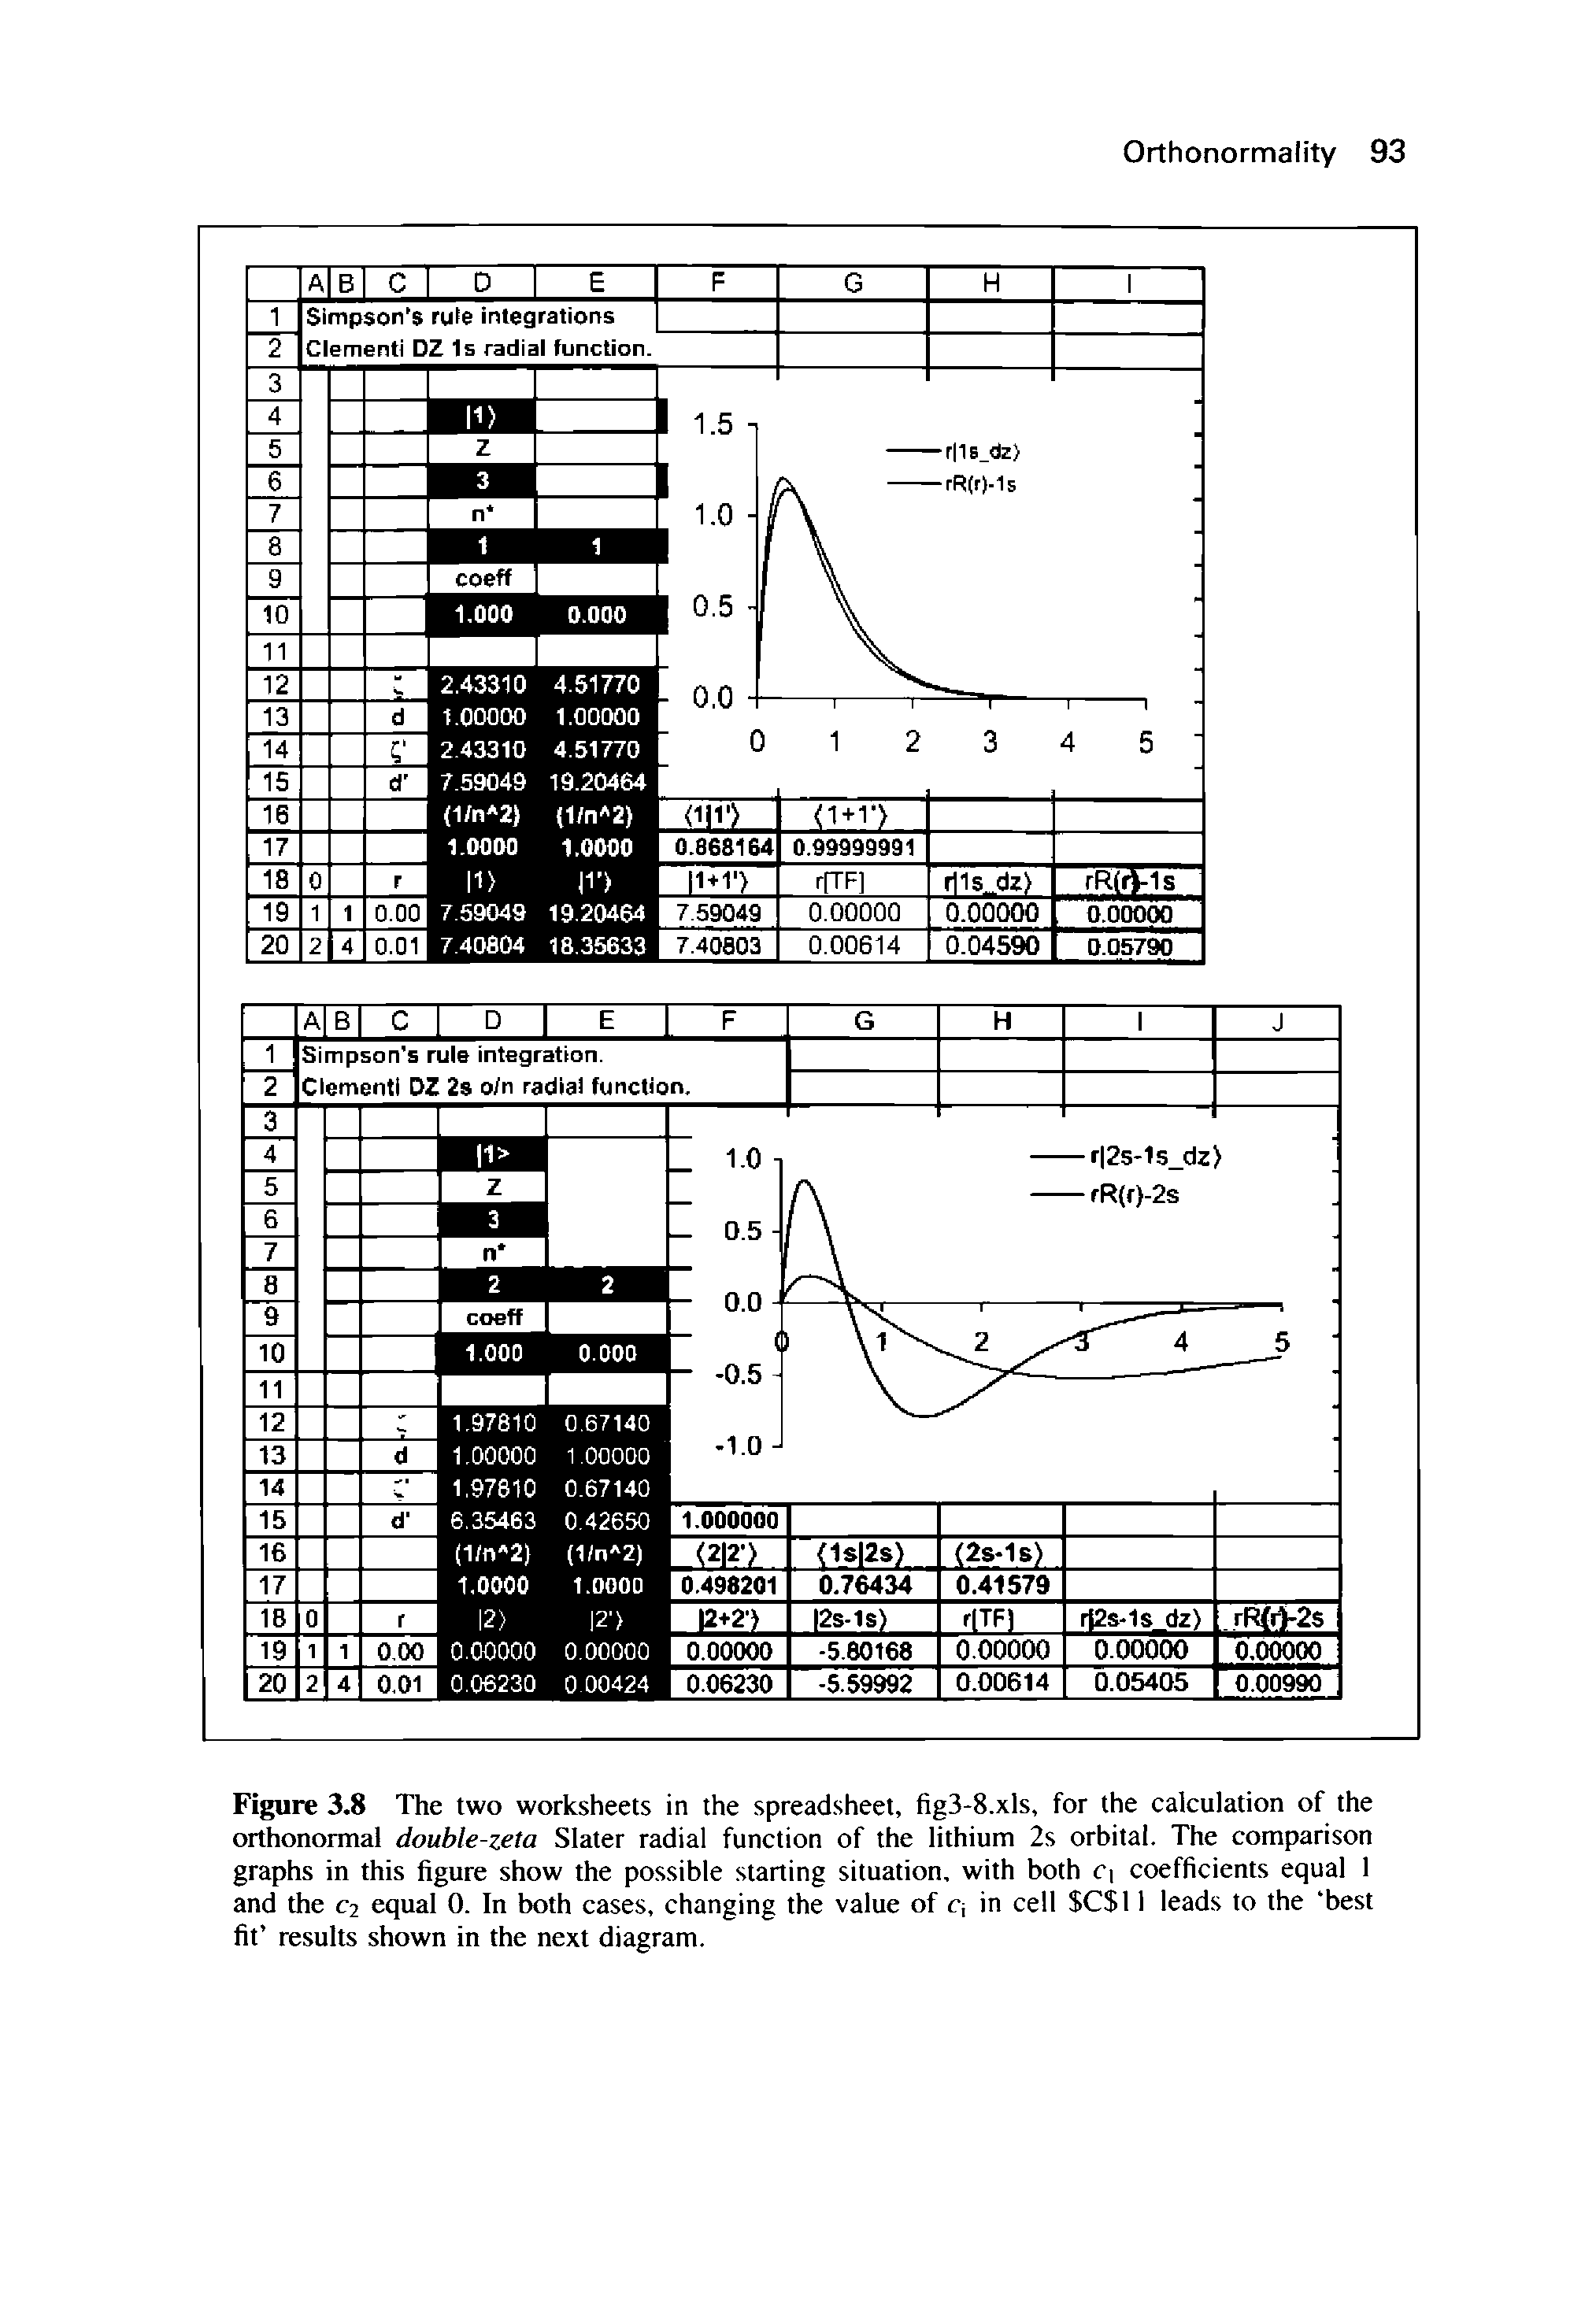 Figure 3.8 The two worksheets in the spreadsheet, fig3-8.xls, for the calculation of the orthonormal double-zeta Slater radial function of the lithium 2s orbital. The comparison graphs in this figure show the possible starting situation, with both C coefficients equal 1 and the C2 equal 0. In both cases, changing the value of cj in cell SCSI 1 leads to the best fit results shown in the next diagram.